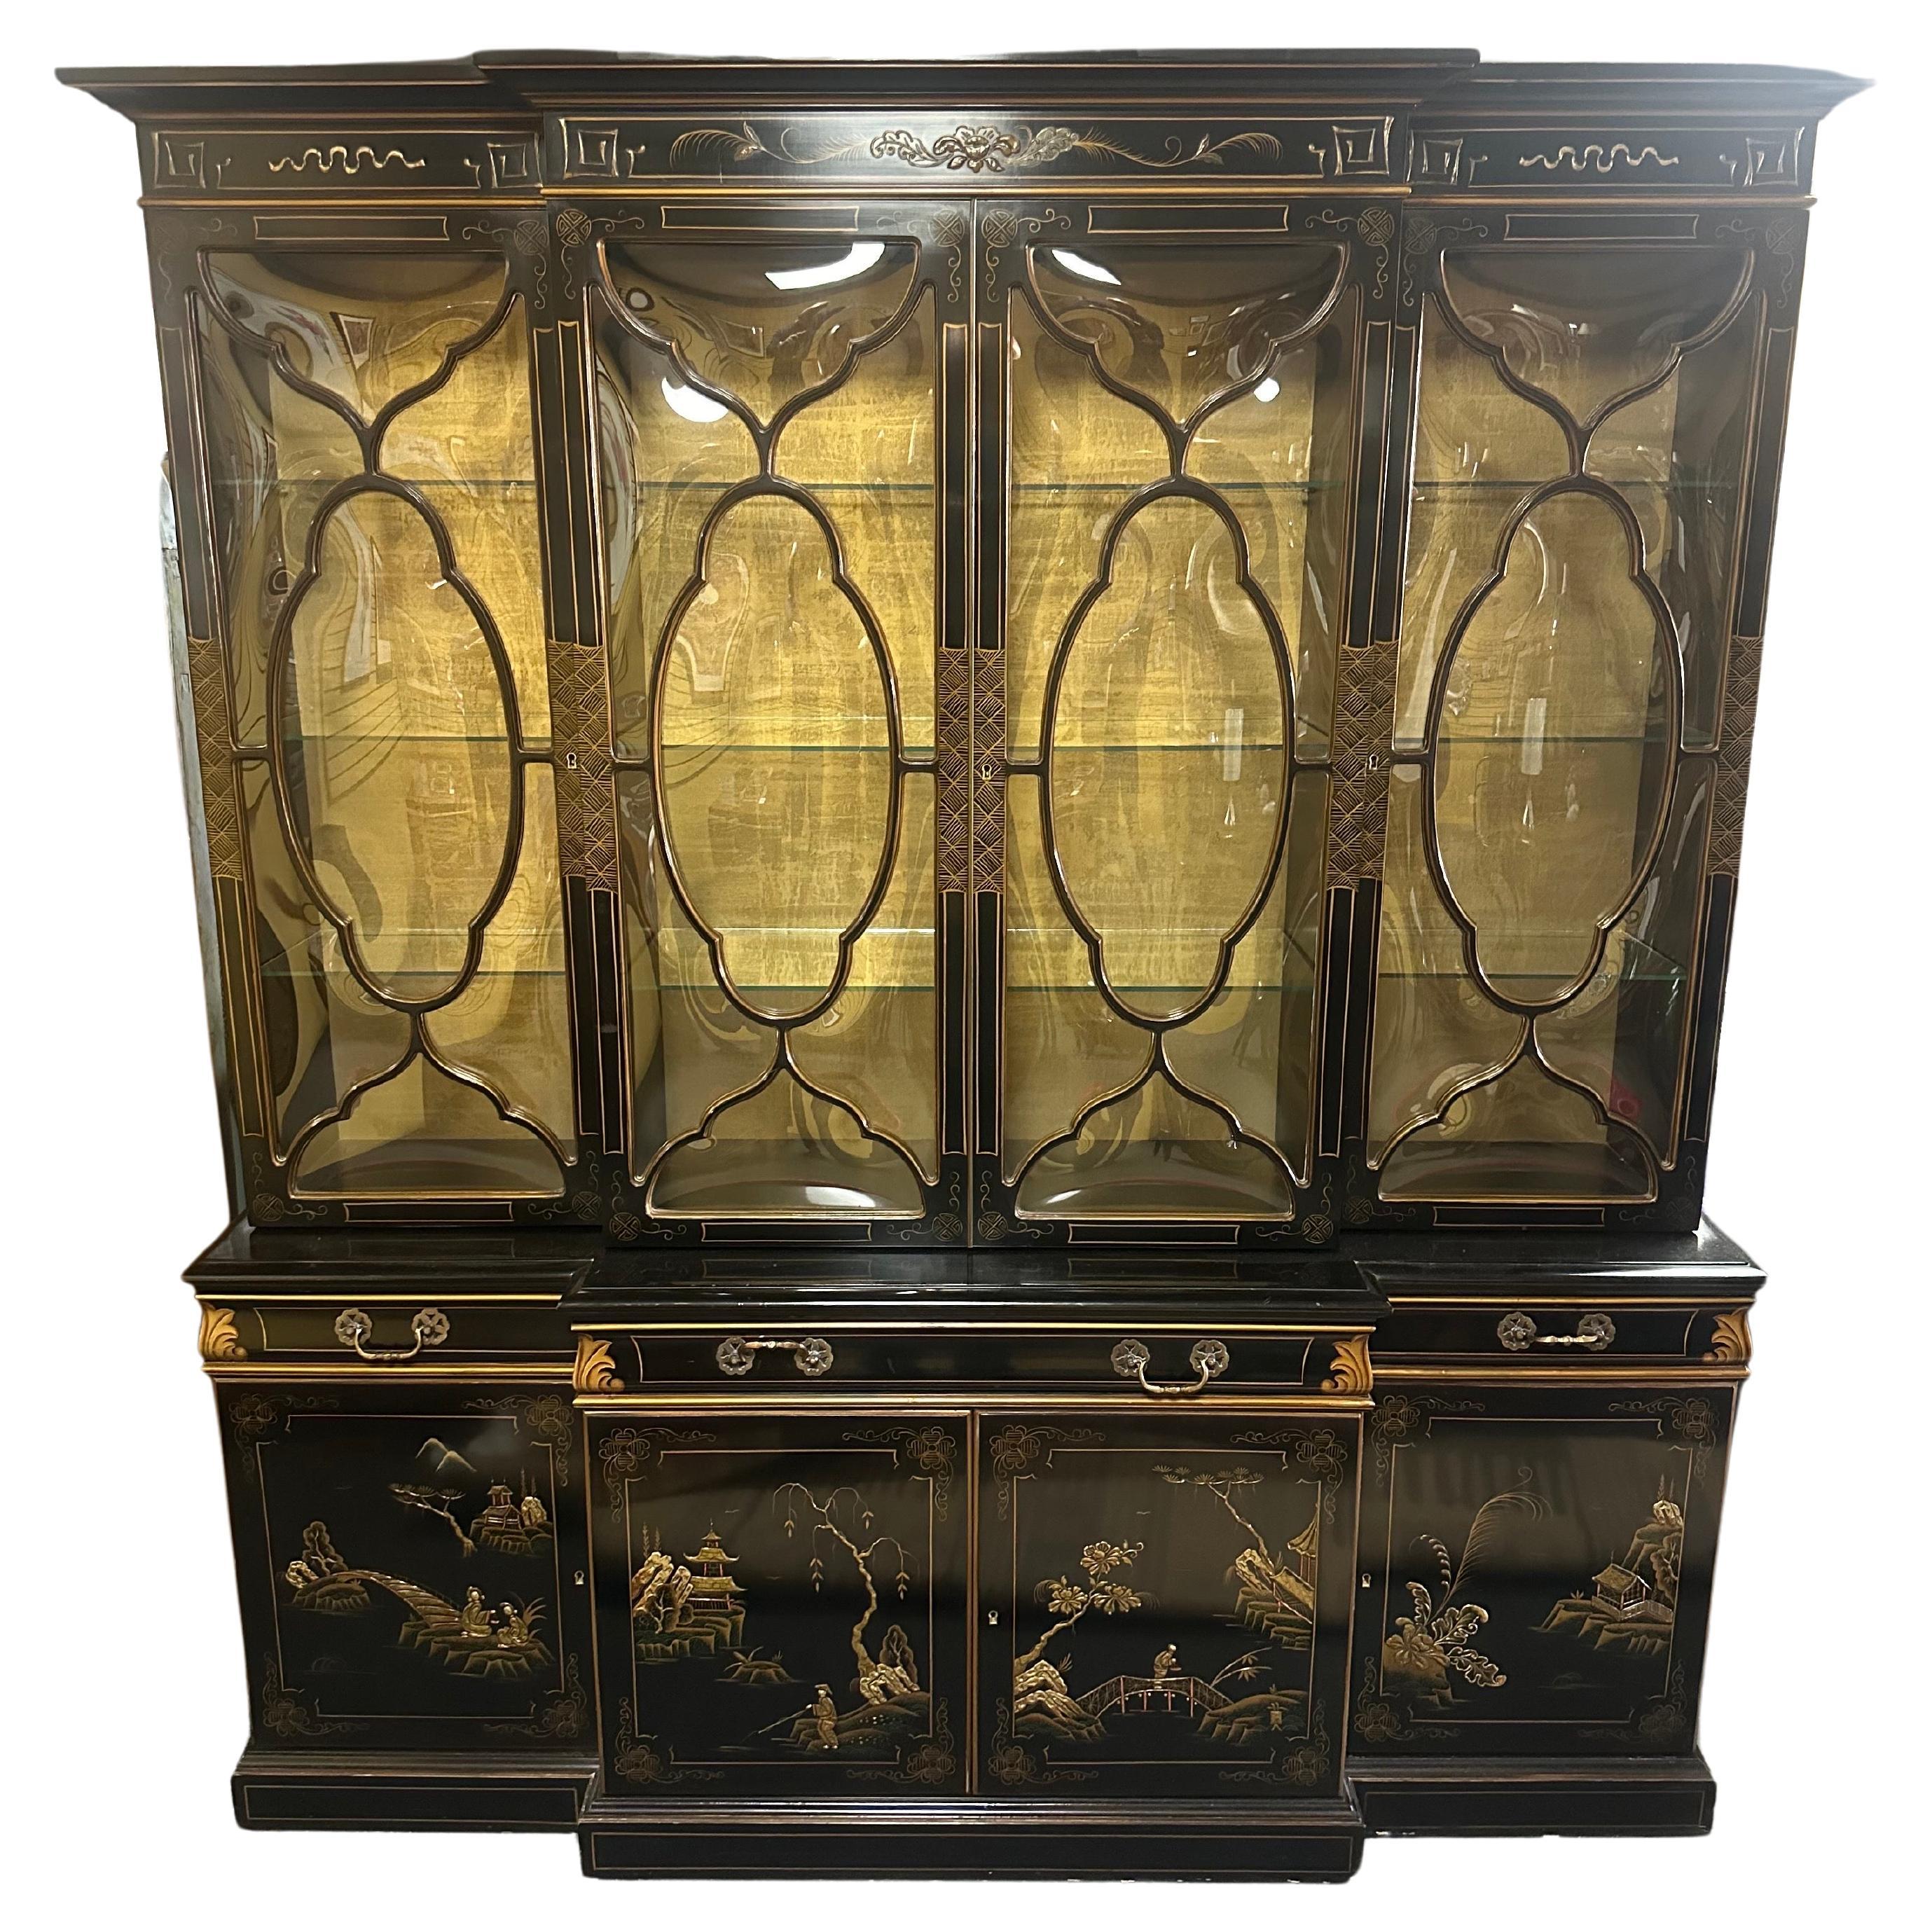 A absolutely stunning chinoiserie bubble glass china cabinet / breakfront by Karges, circa 1980s. This amazing piece has bubble glass, top lighting, a pull out leather top drawer / shelf and glass shelving throughout.  Comes with original keys.  The